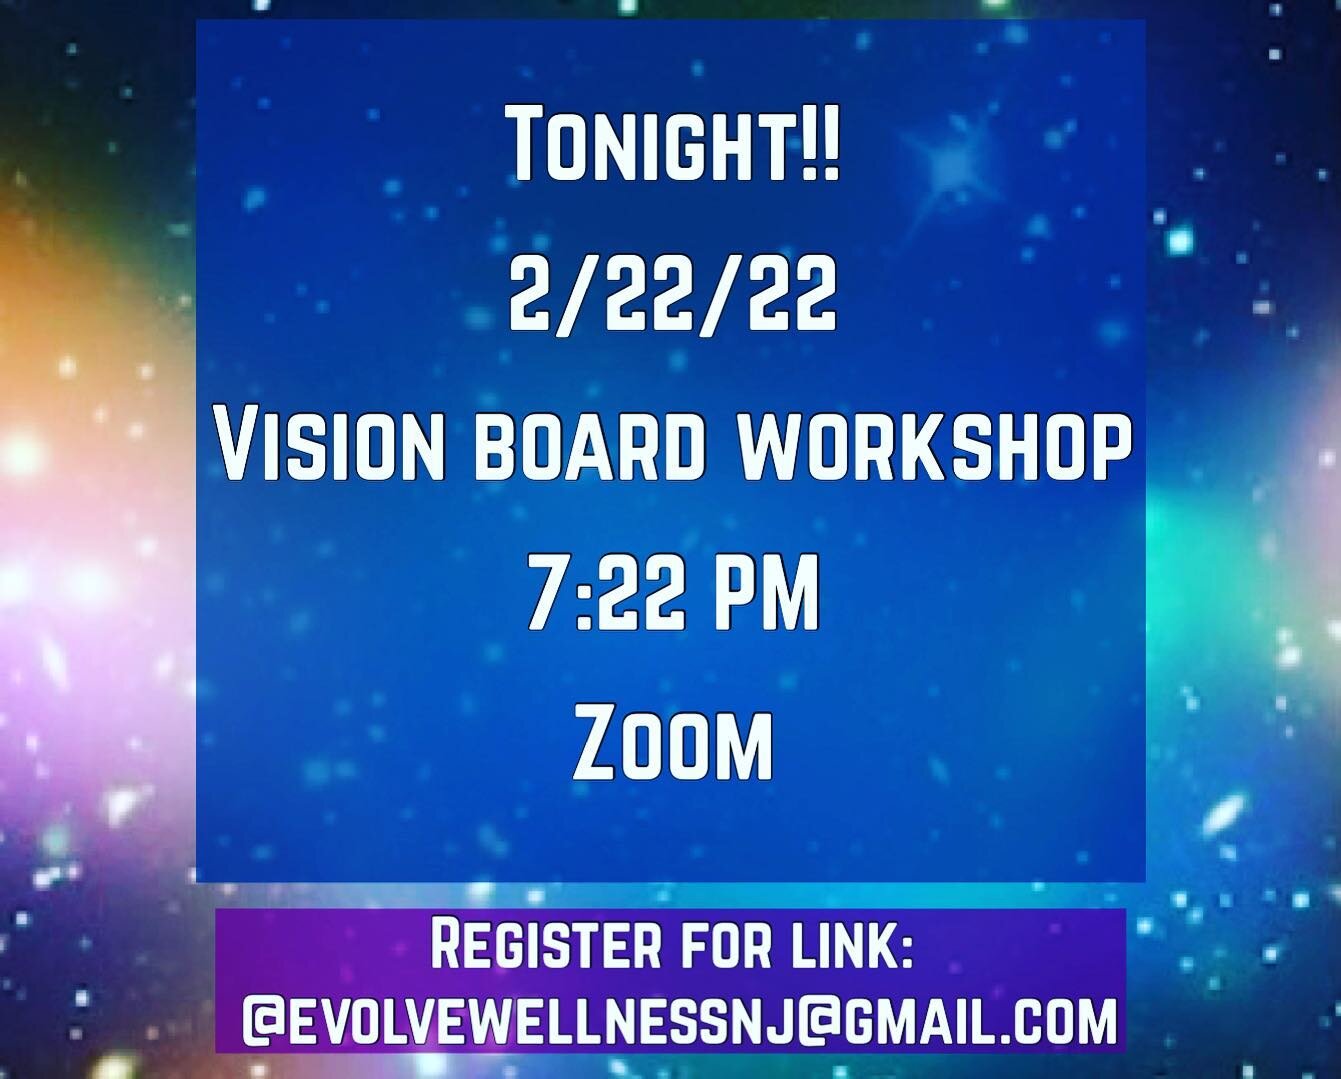 What? Vision Board Workshop
Manifesting that which we desire to be and attract to us over the next year!
When? Tonight during this powerful portal! 
2/22/22 at 7:22 PM
Where? Zoom. Link sent once you register.
How? Register by contacting office: evol